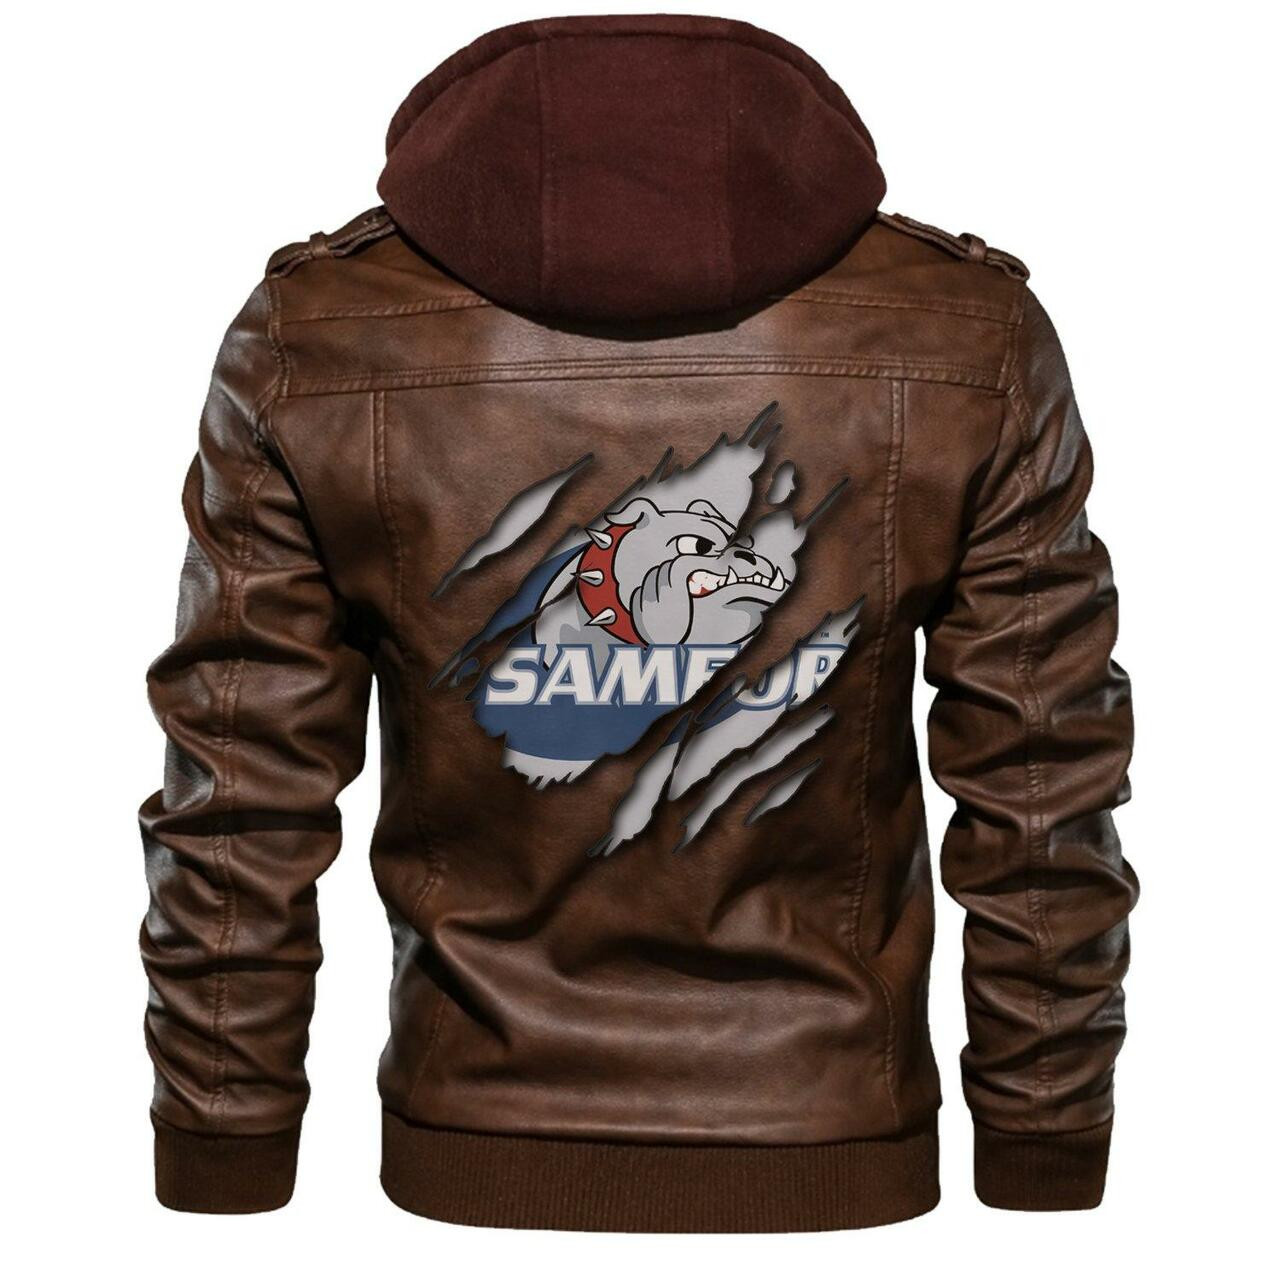 This leather Jacket will look great on you and make you stand out from the crowd 245